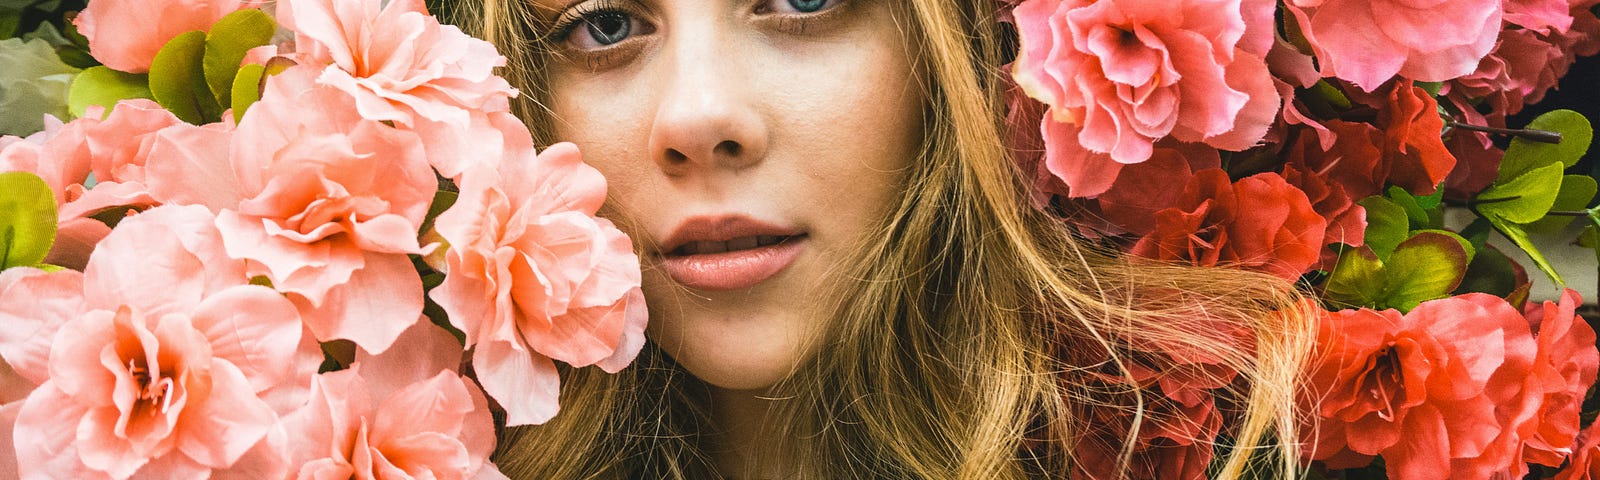 young woman looking unhappy surrounded by flowers